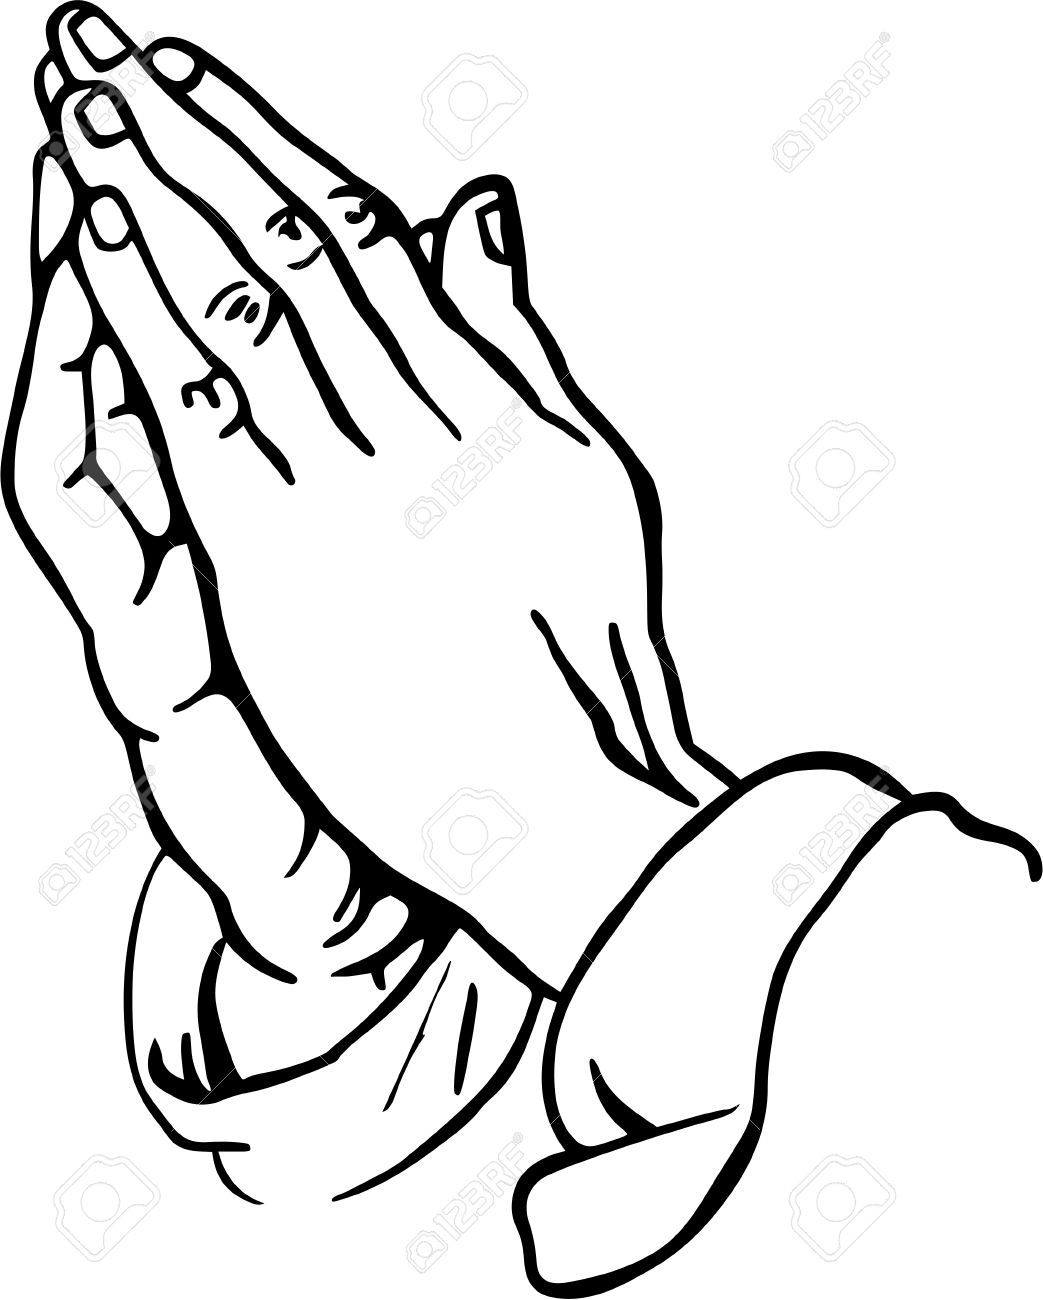 praying hands clipart stock photo, picture and royalty free image